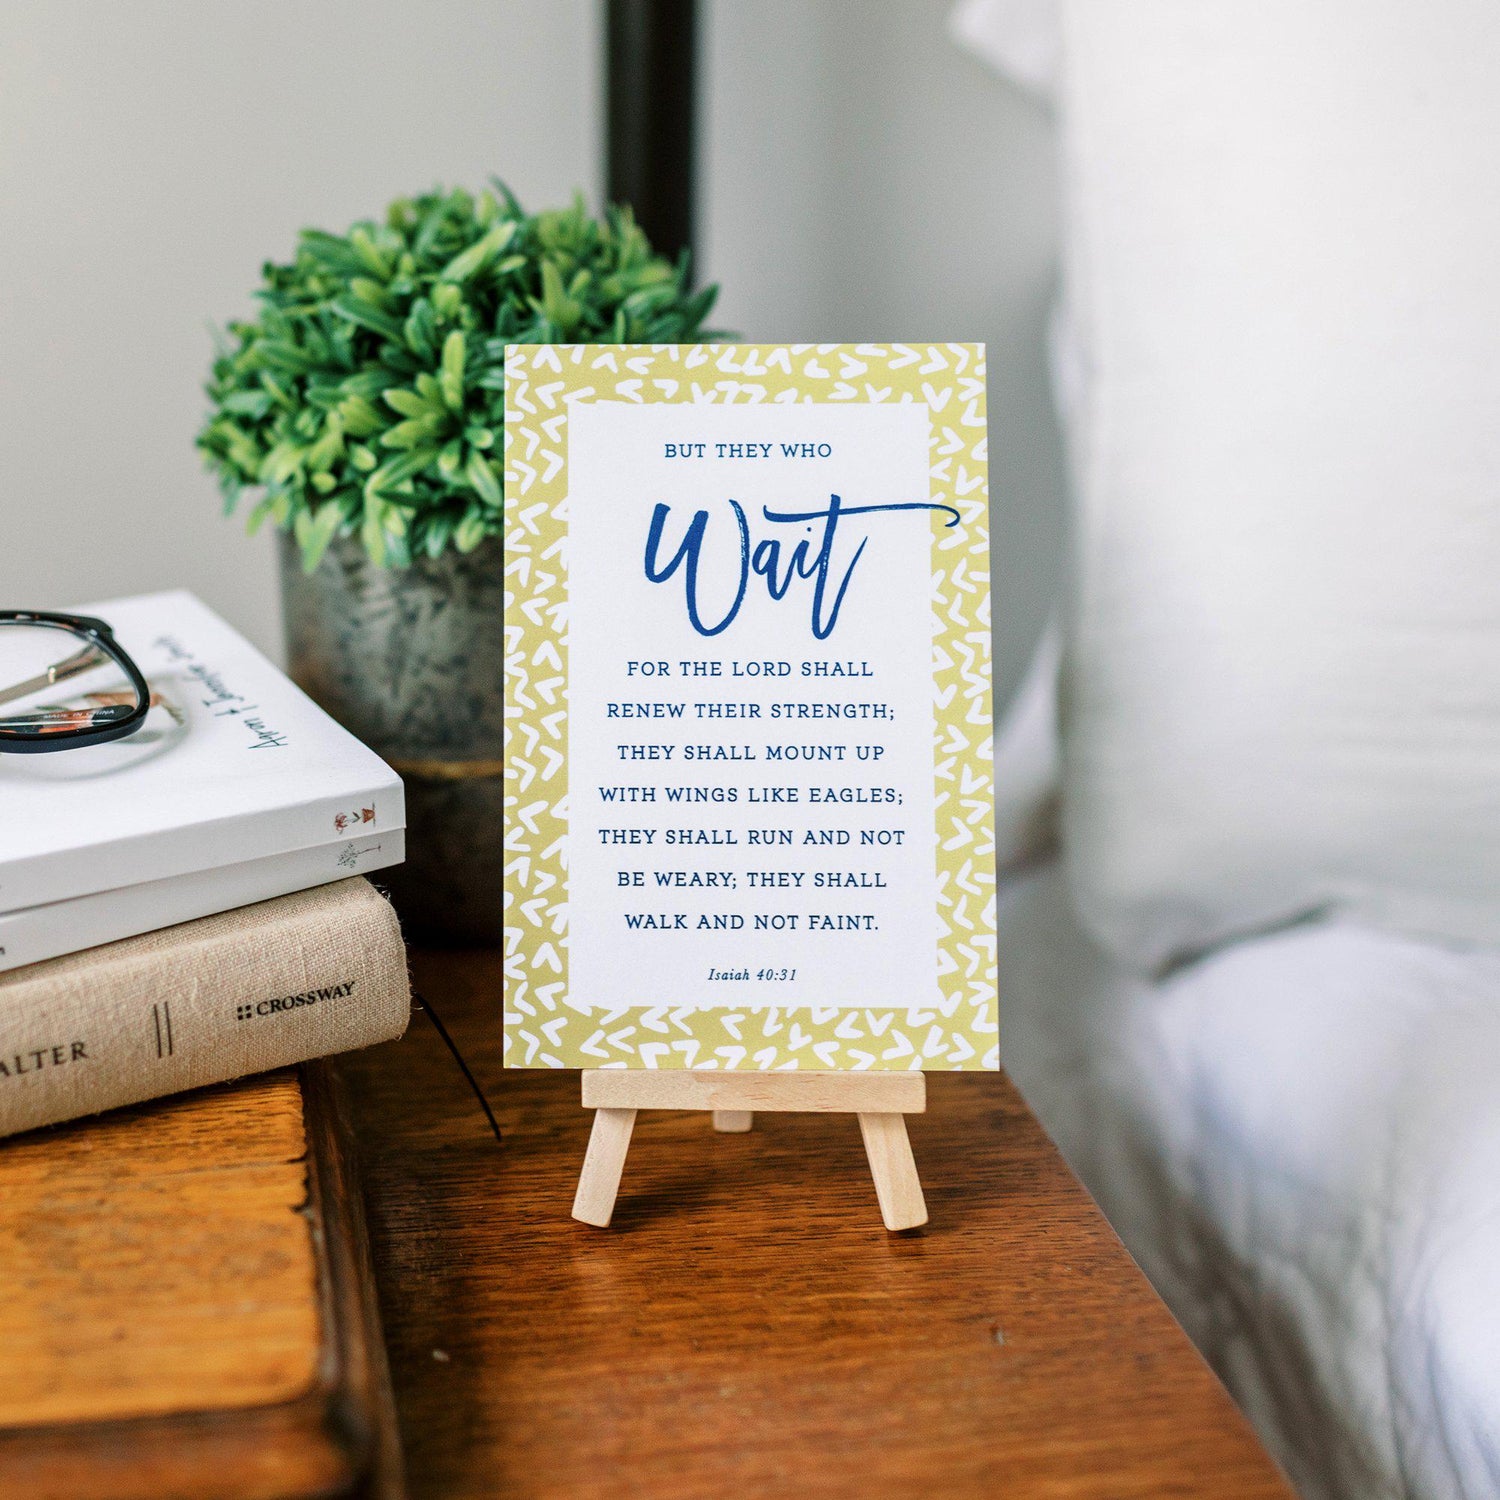 Bible verse cards from Muscadine Press.